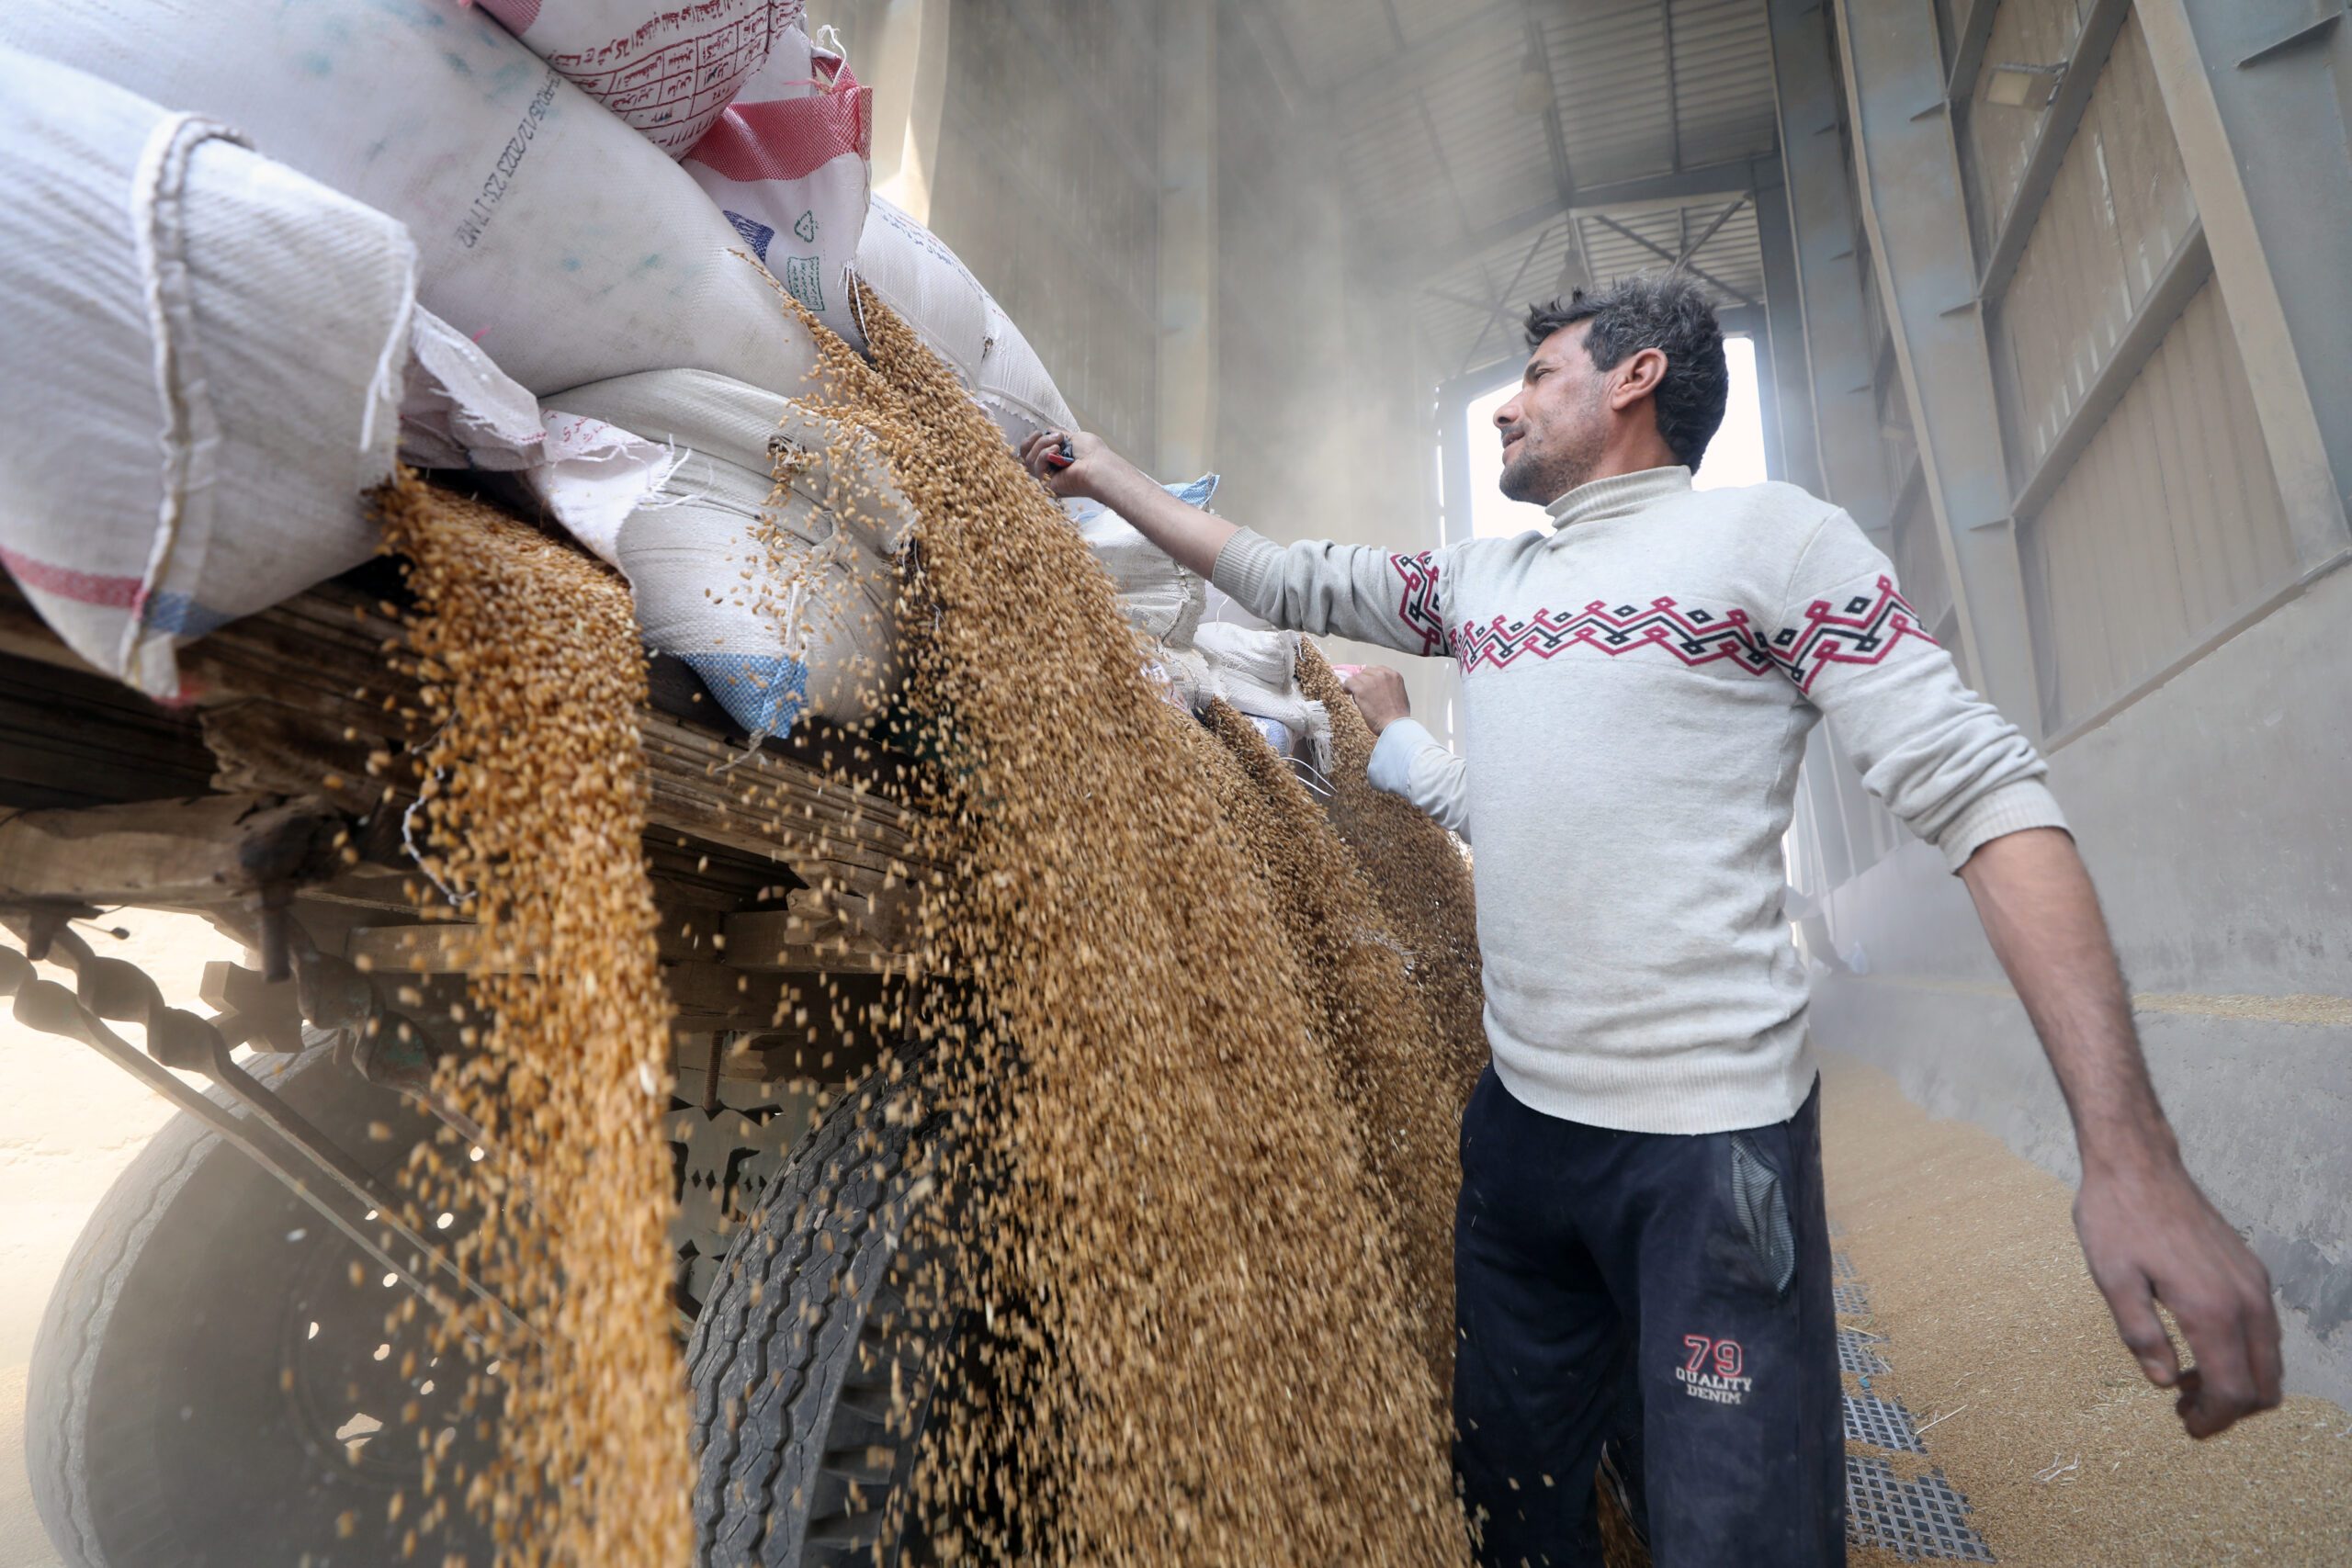 A worker unloads wheat in Qalyubia, north of Cairo. Analysts warn that a rise in bread prices could harm imnproving business sentiment